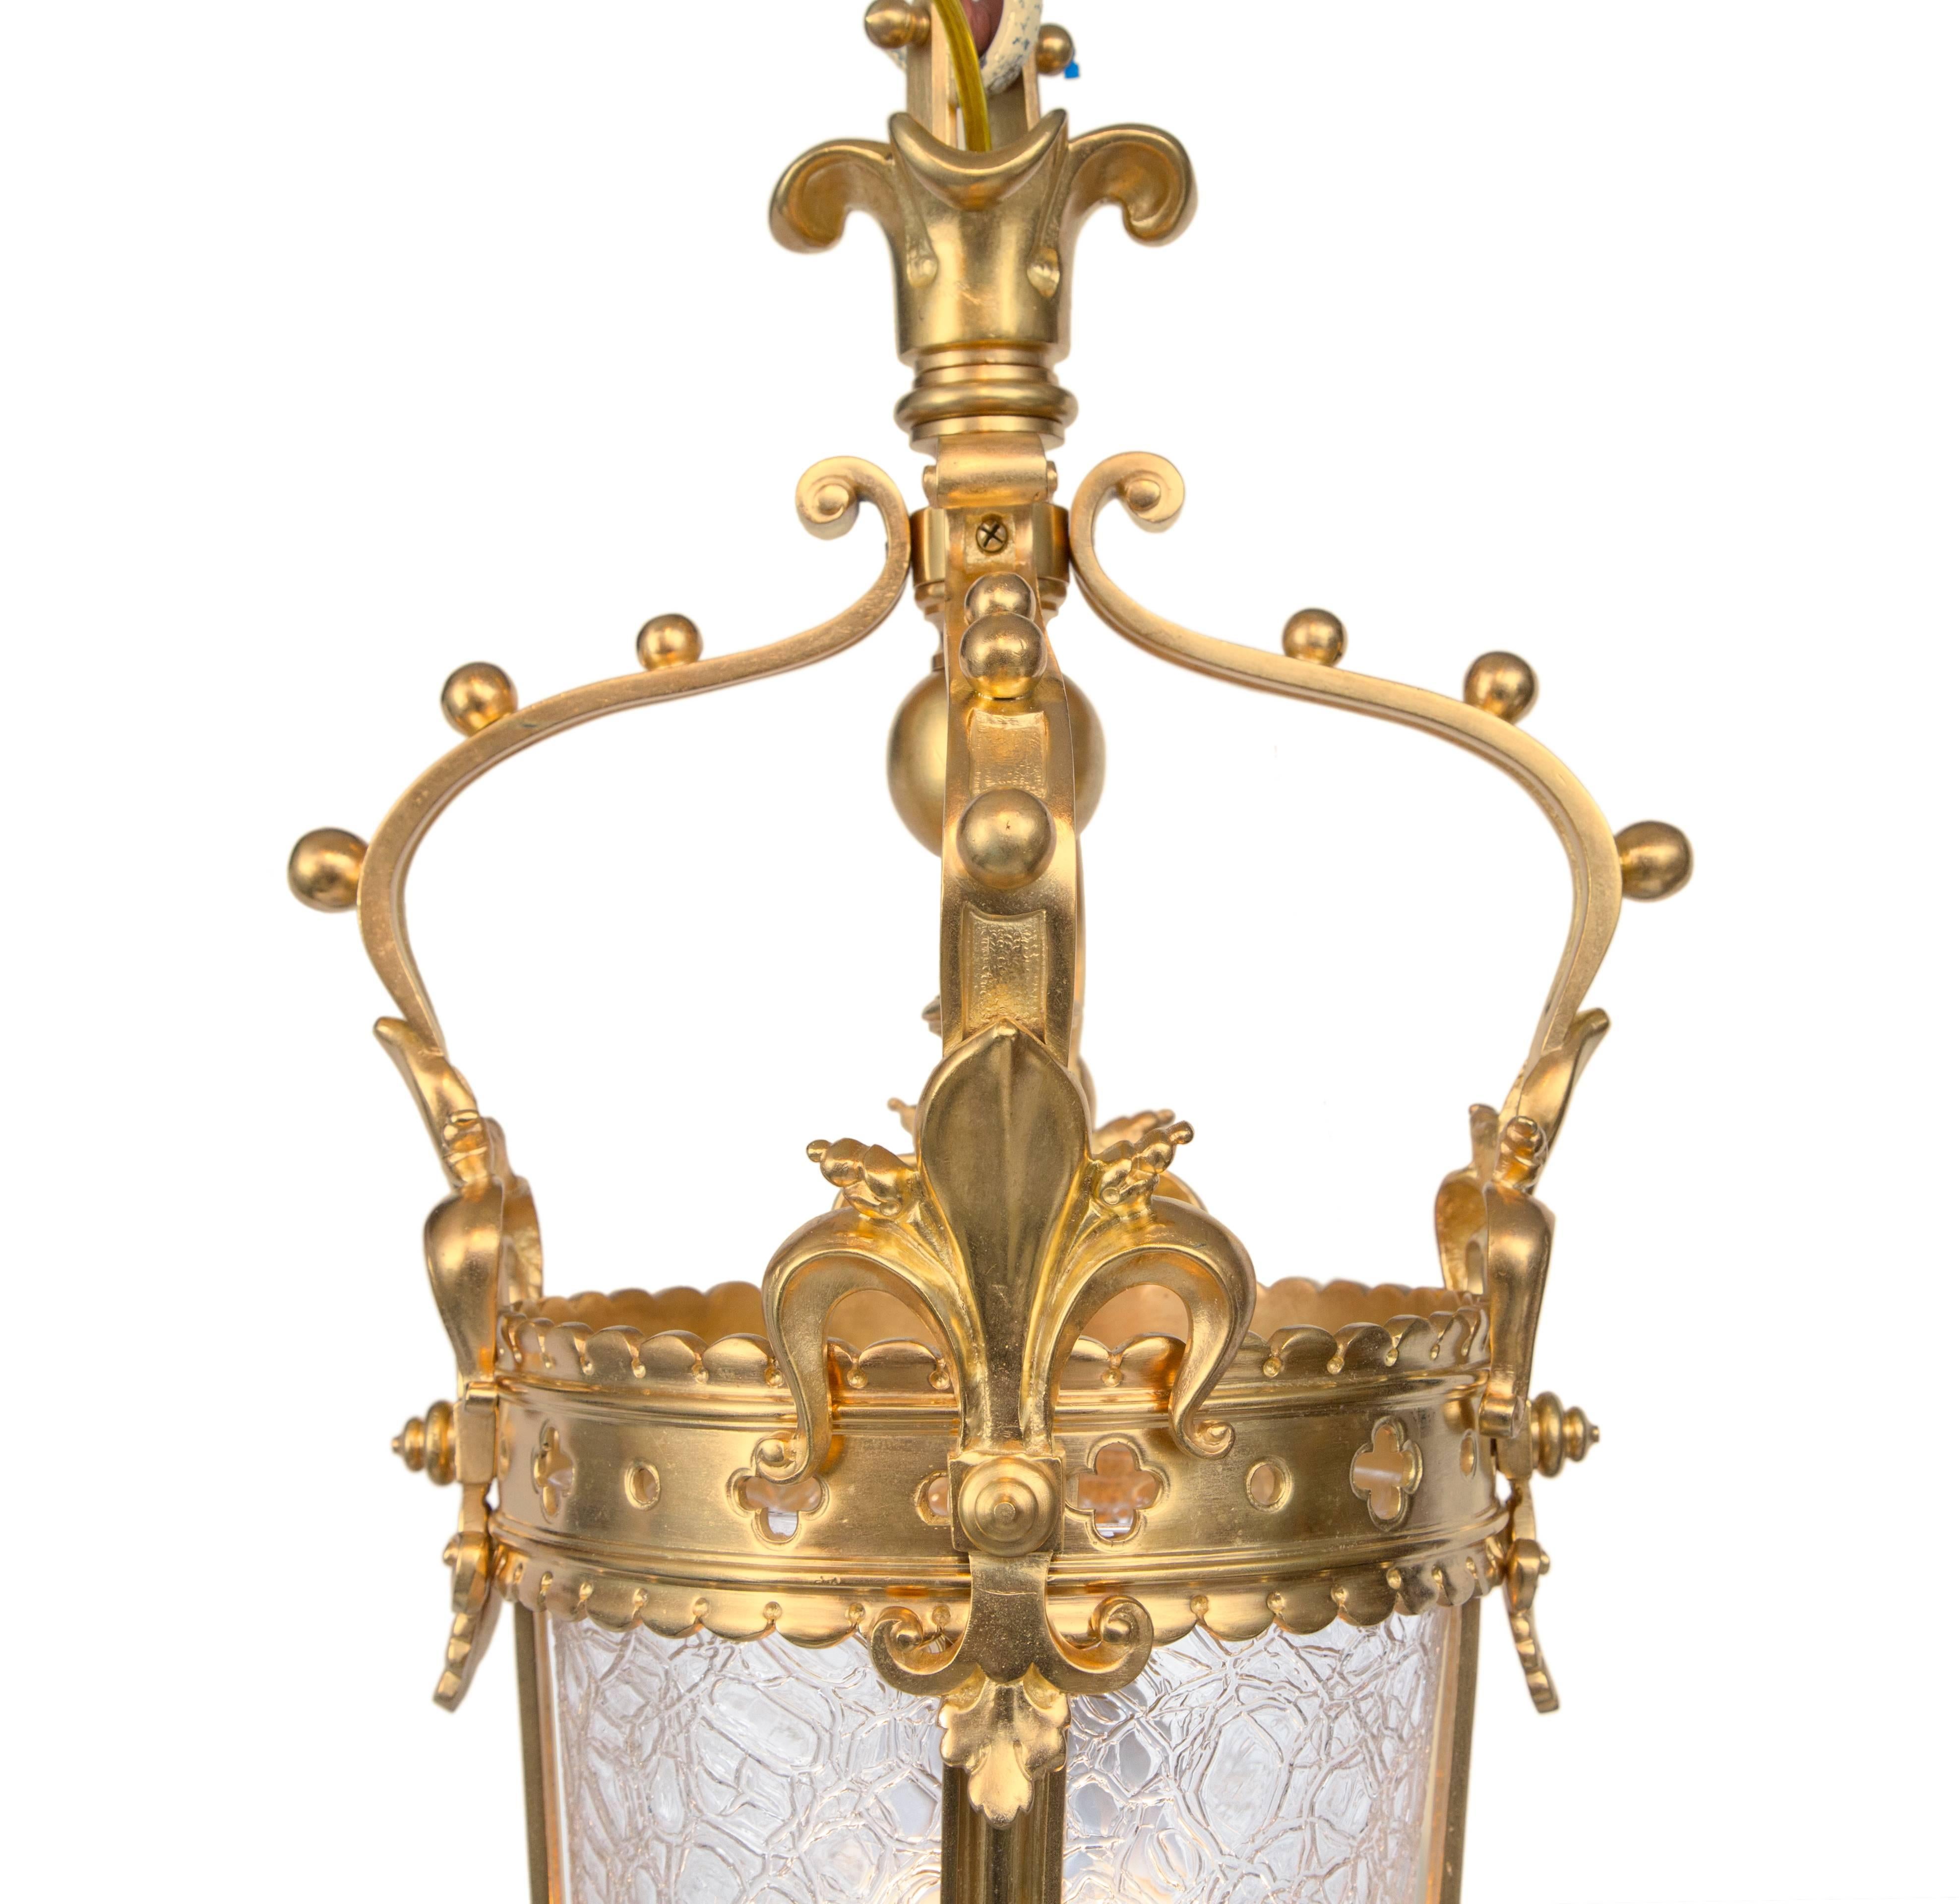 An elegant and small-scale French 19th century Renaissance style ormolu and glass lantern chandelier. The lantern is centered by a most decorative pierced bottom inverted finial. Four lightly curved supports encase the central textured glass and